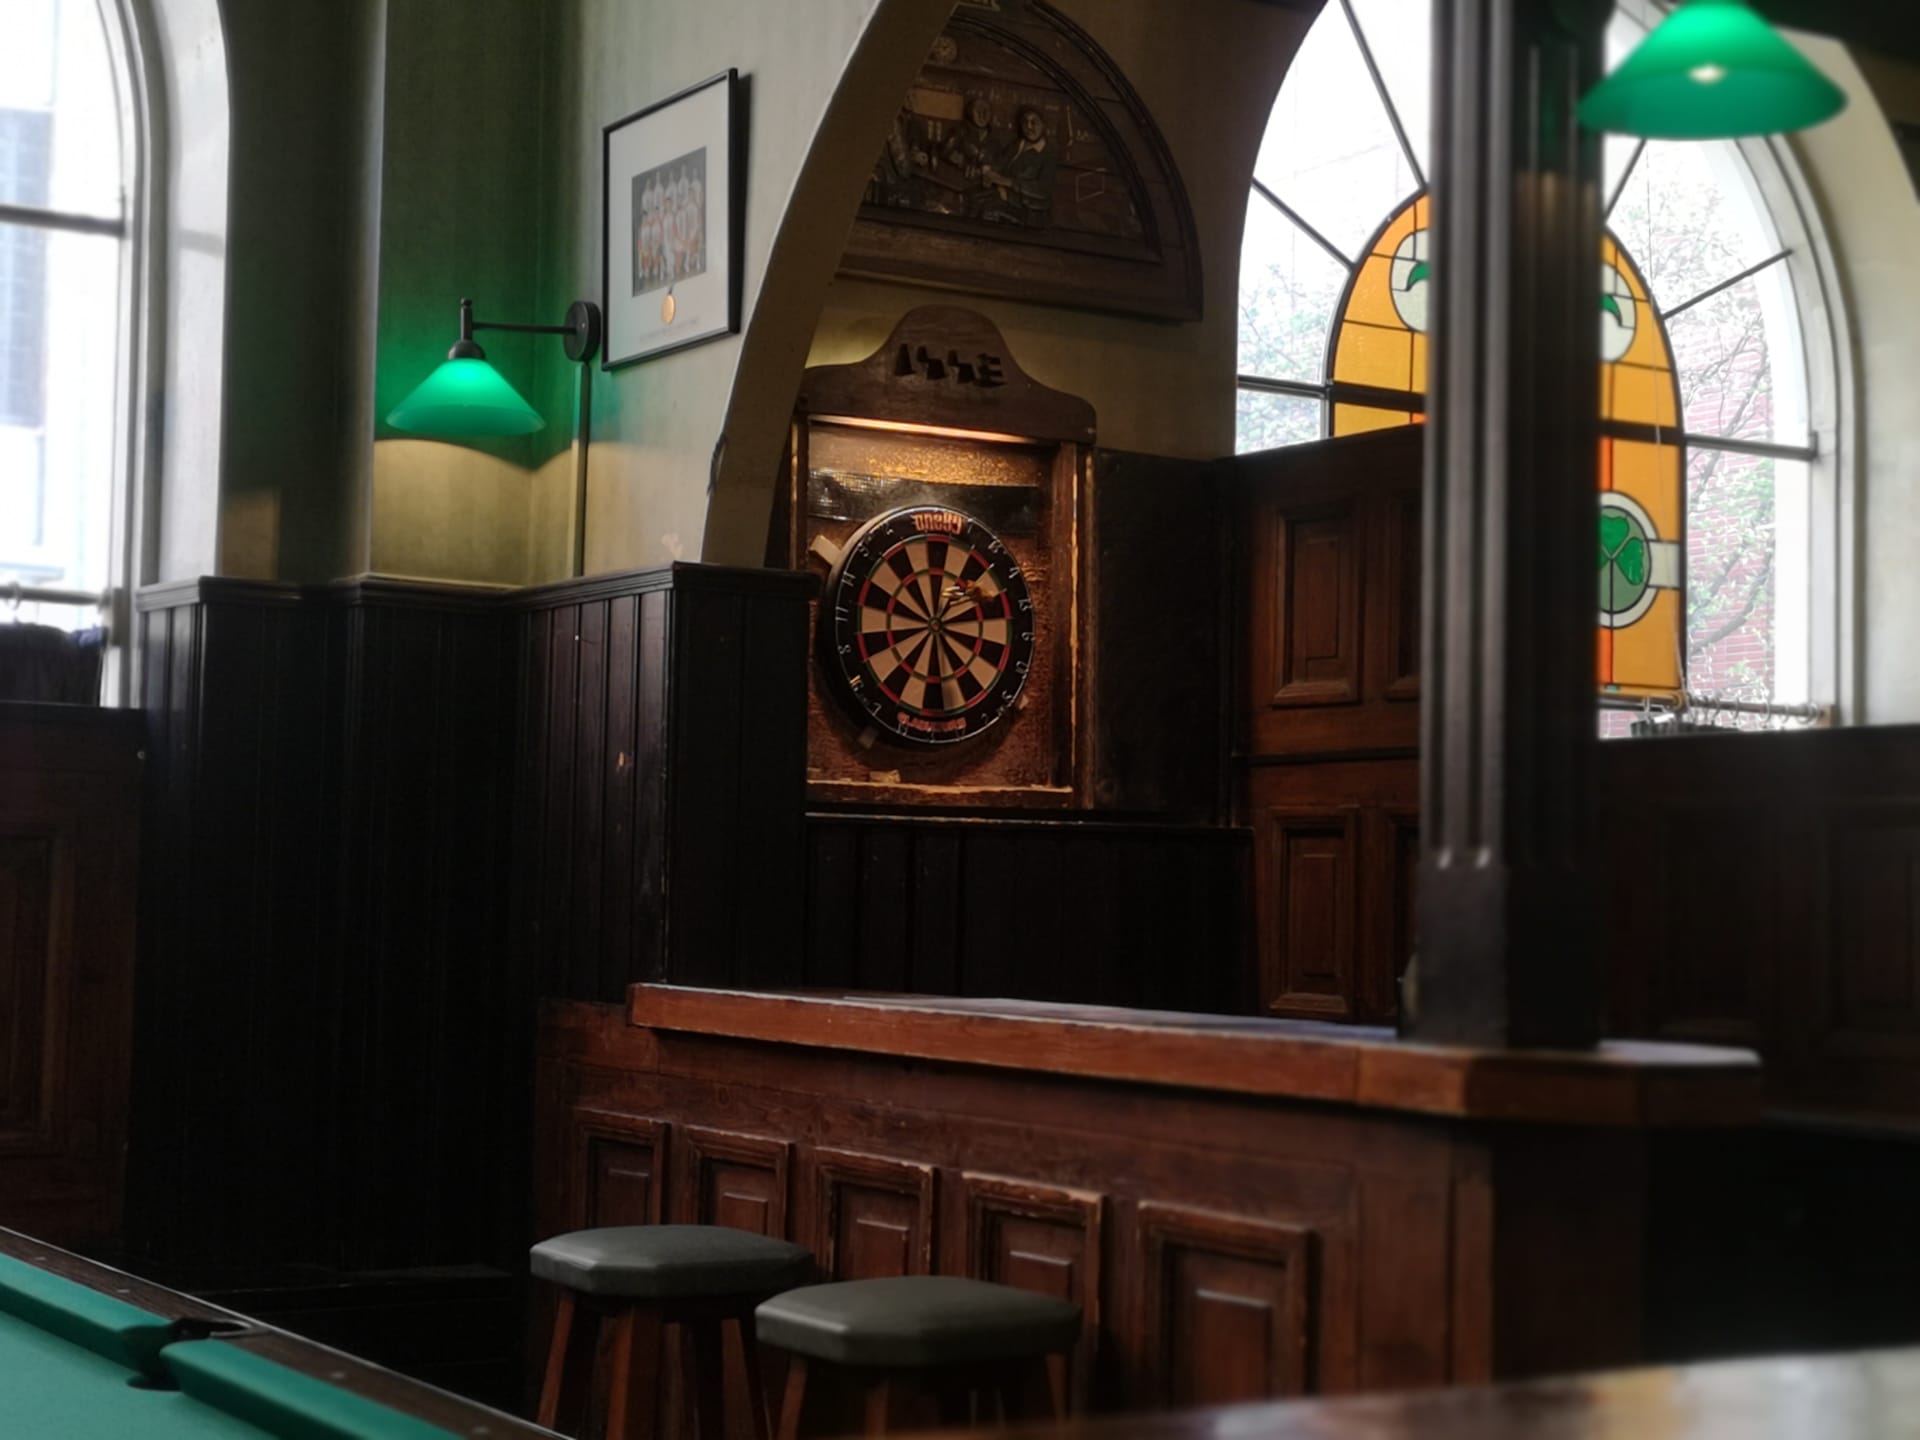 Challenge your friend to a round of darts or billiards.